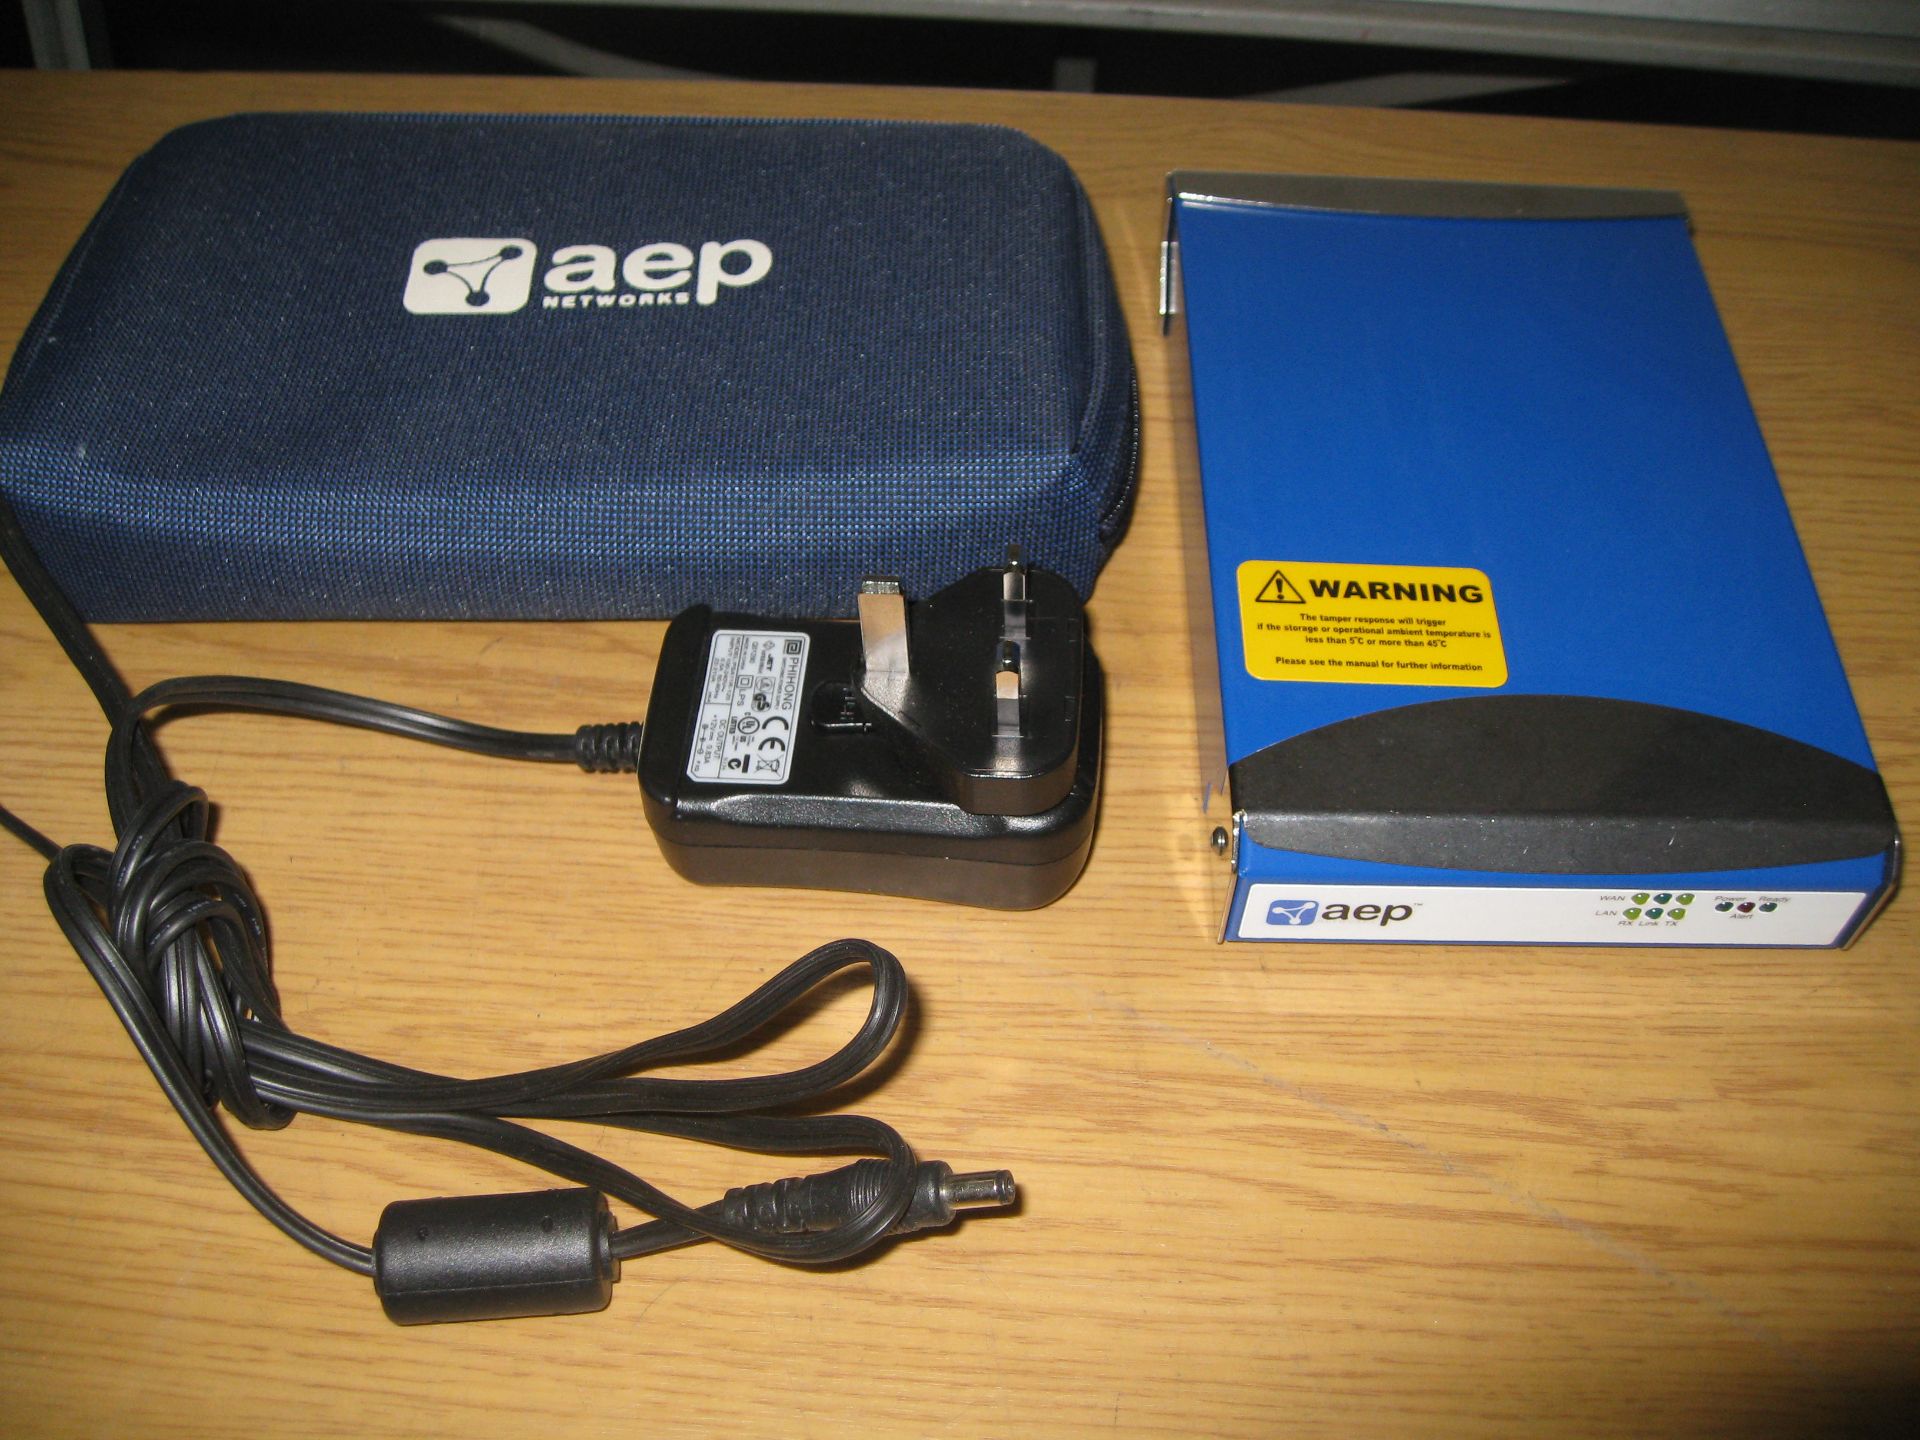 AEP Net Remote encryptor hardware VPN (virtual private network) client with psu & case. More info